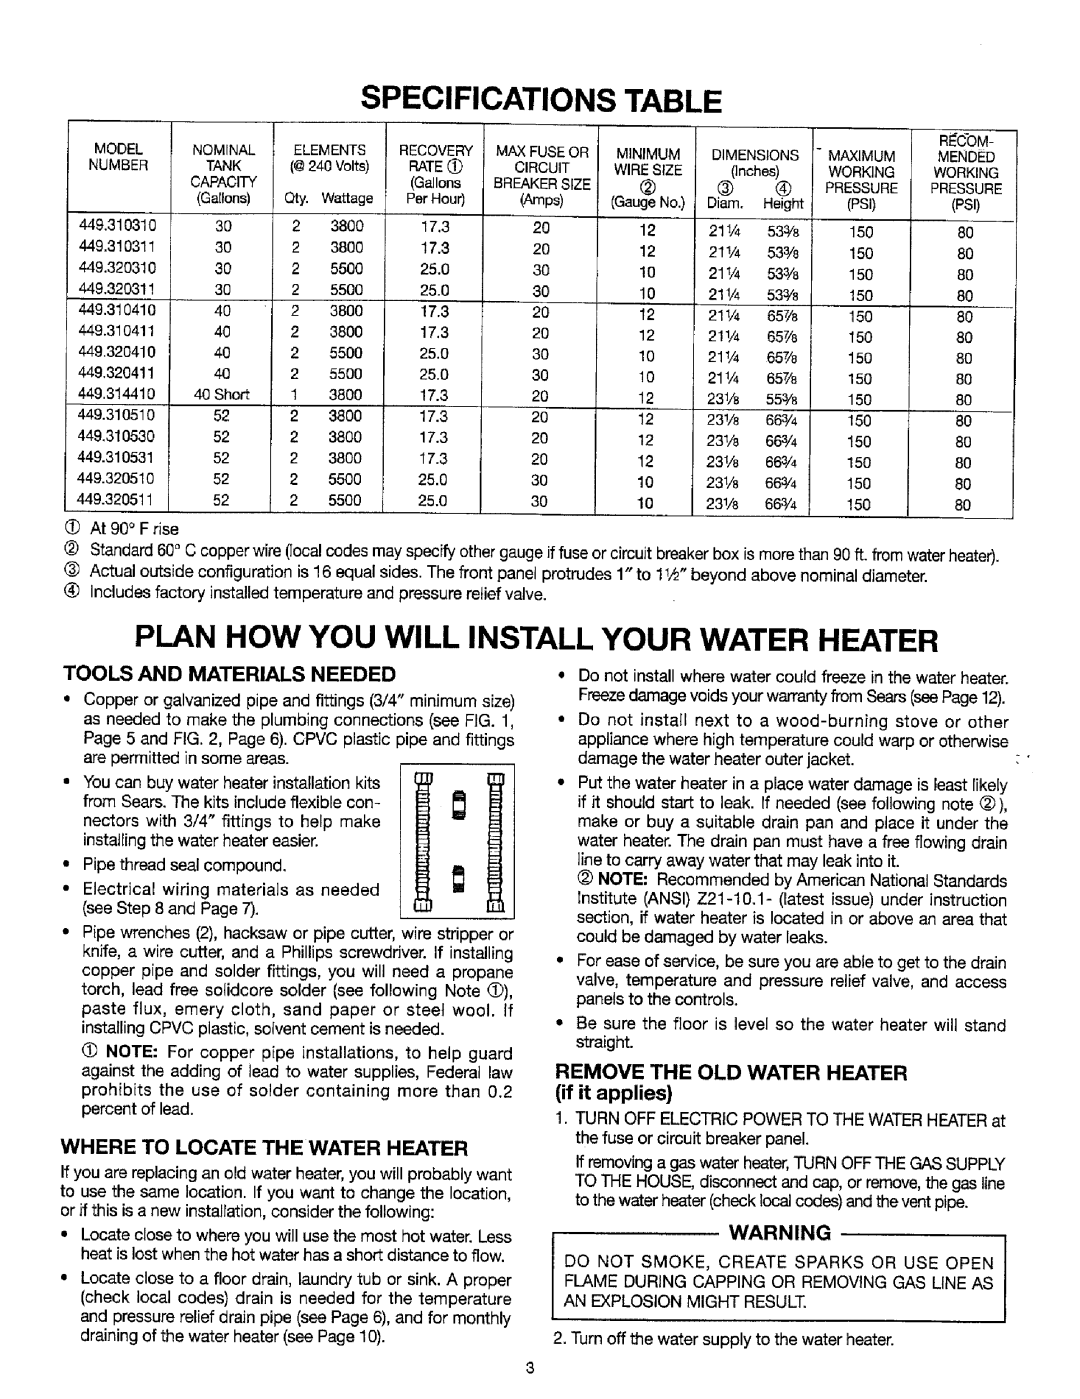 Sears 449.31053 Specifications, Plan How You Will Install Your Water Heater, Arnps, Tools And Materials Needed, Warningi 